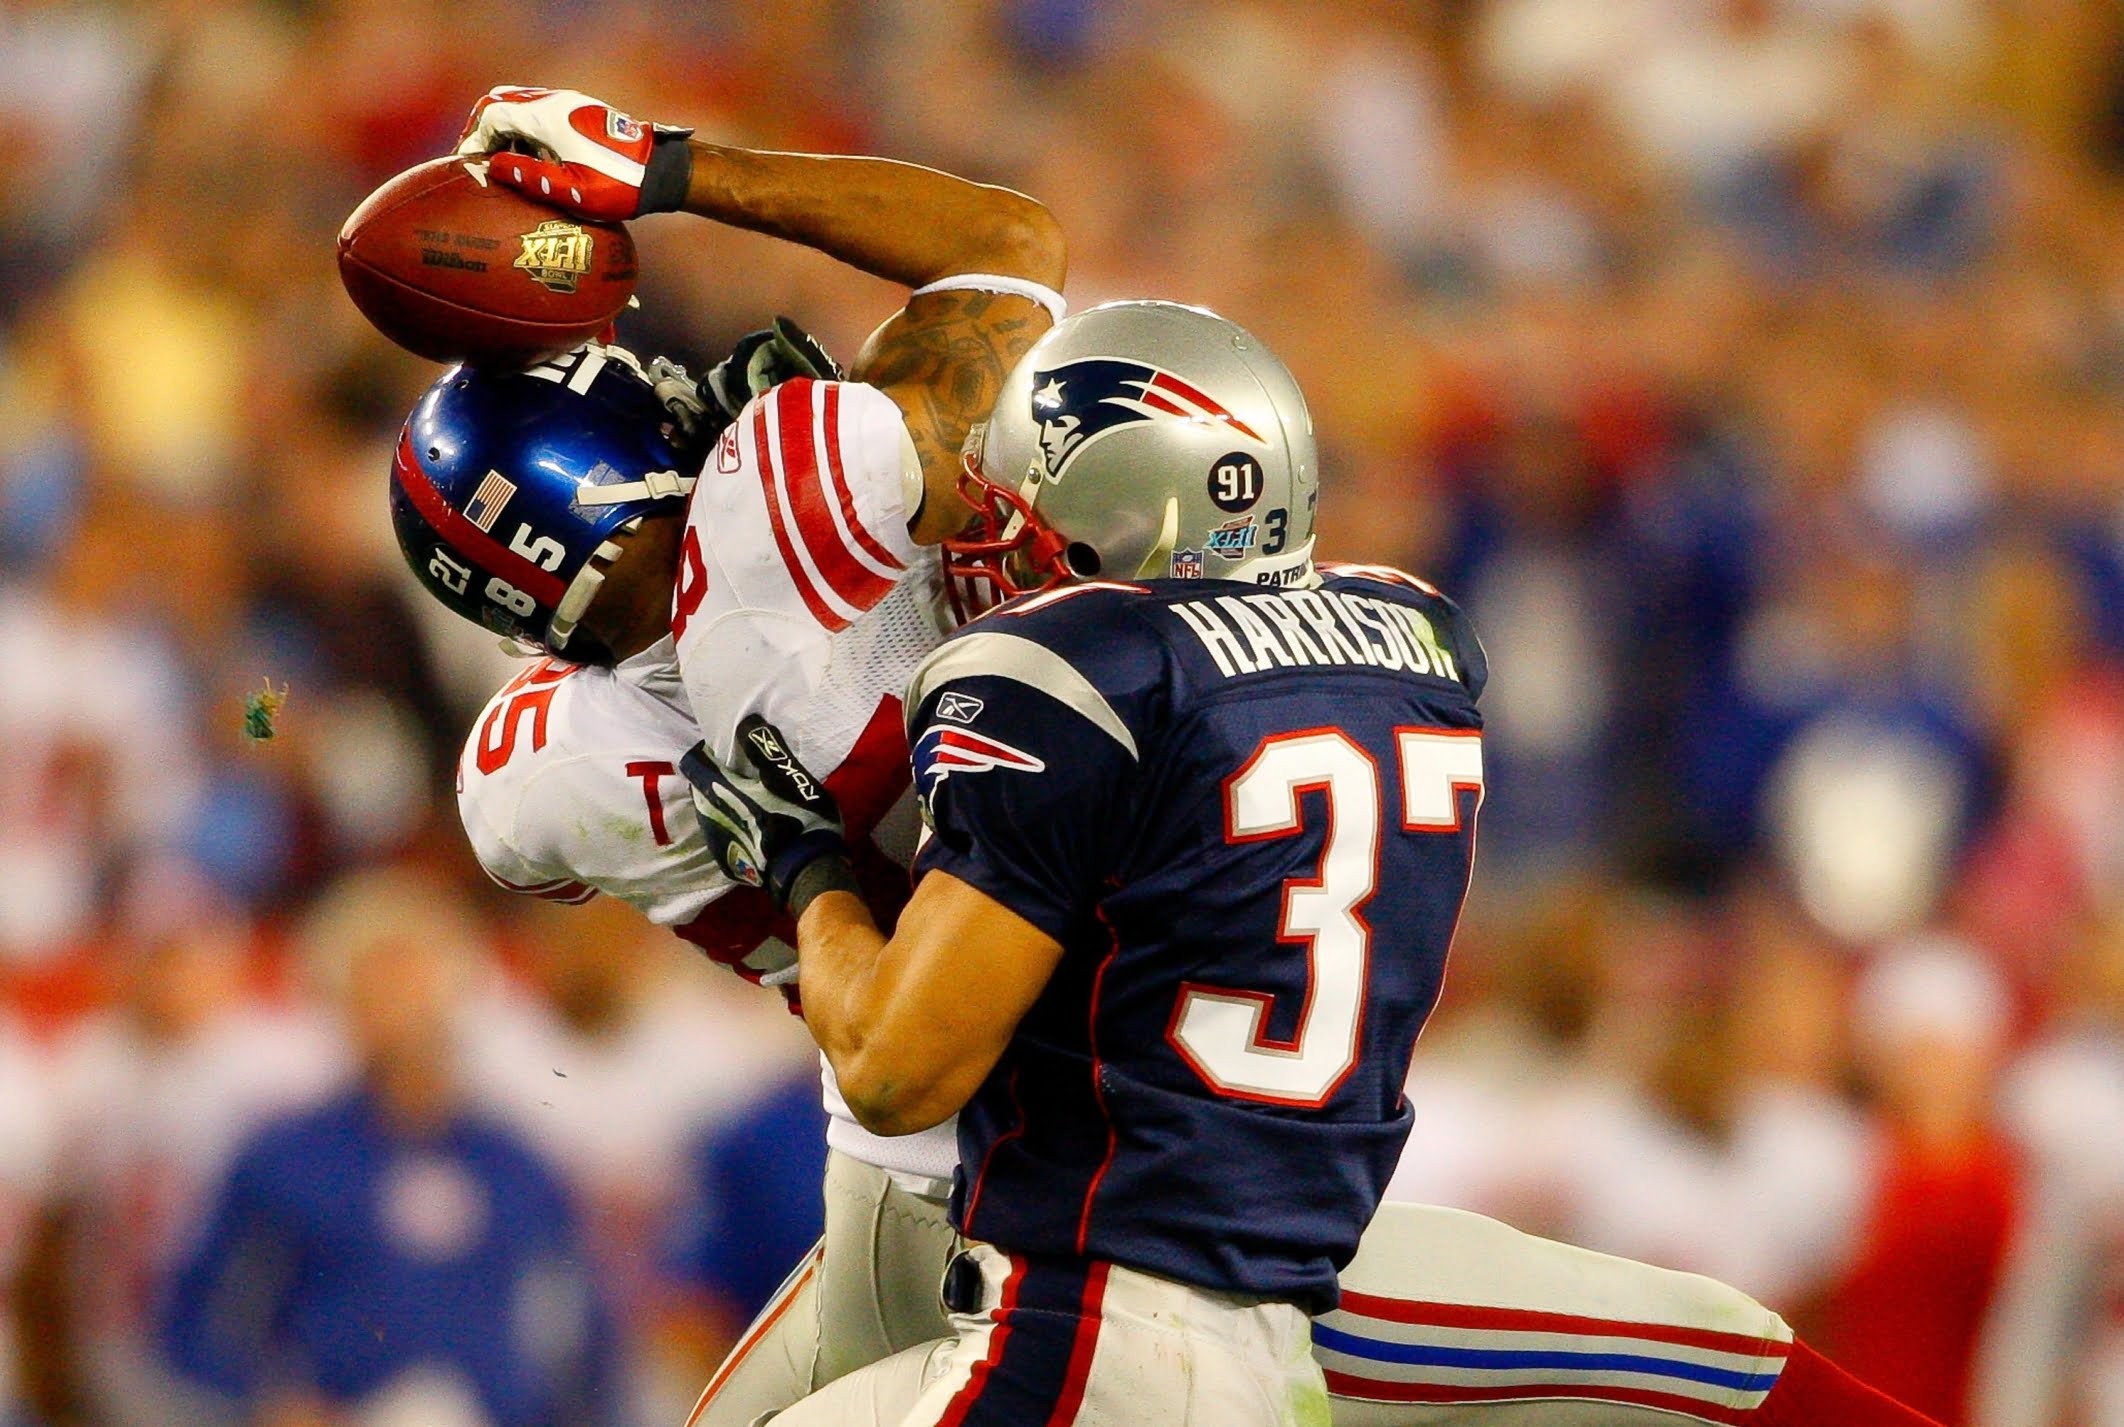 5 greatest Super Bowl moments of all-time, including David Tyree’s helmet catch